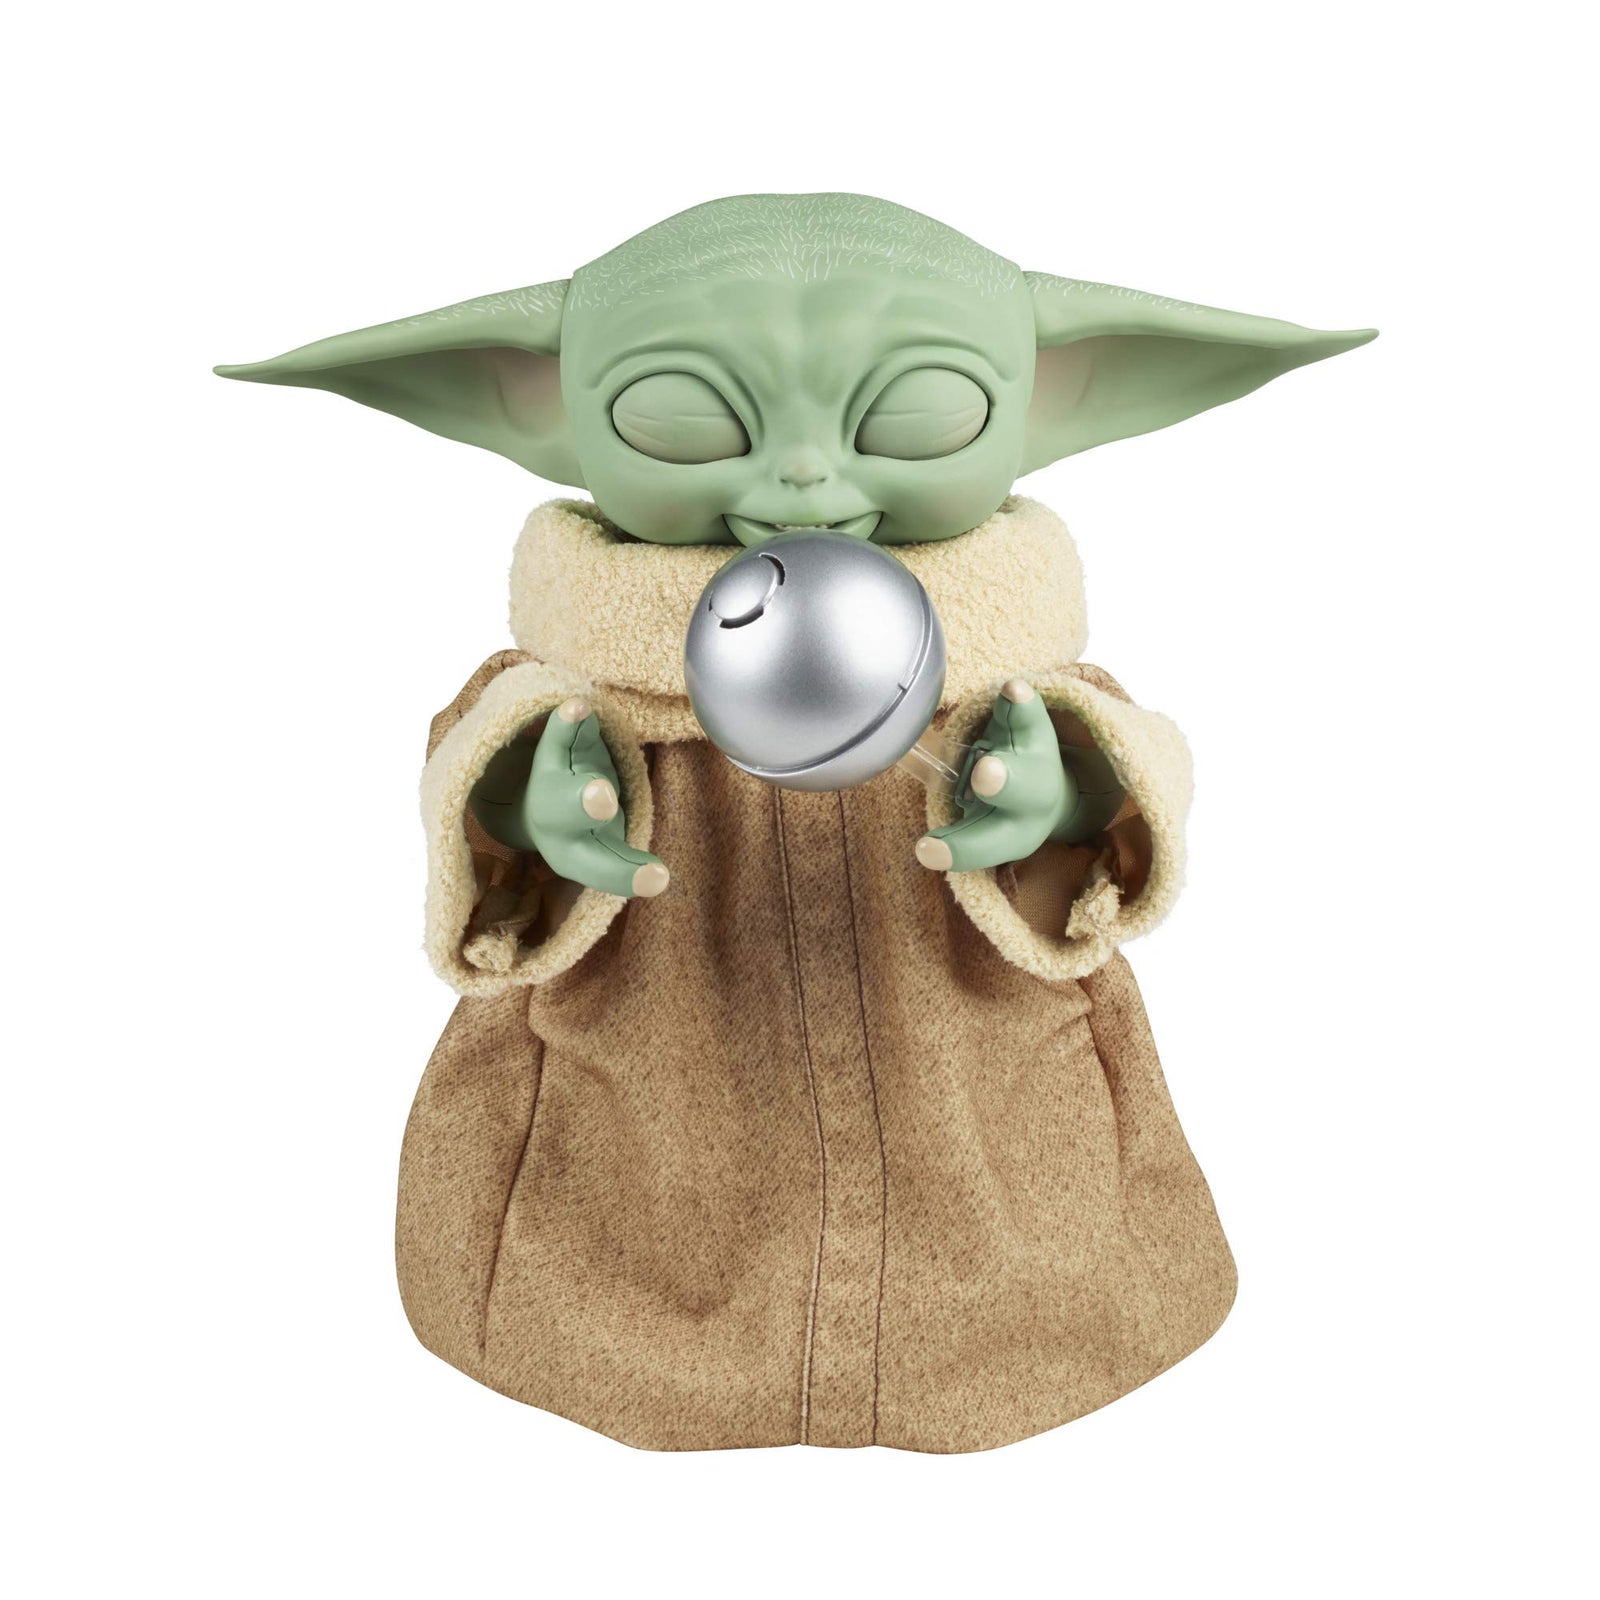 Star Wars Galactic Snackin’ Grogu 9.25-Inch-Tall Animatronic Toy with Over 40 Sound and Motion Combinations and Interactive Accessories,F2849